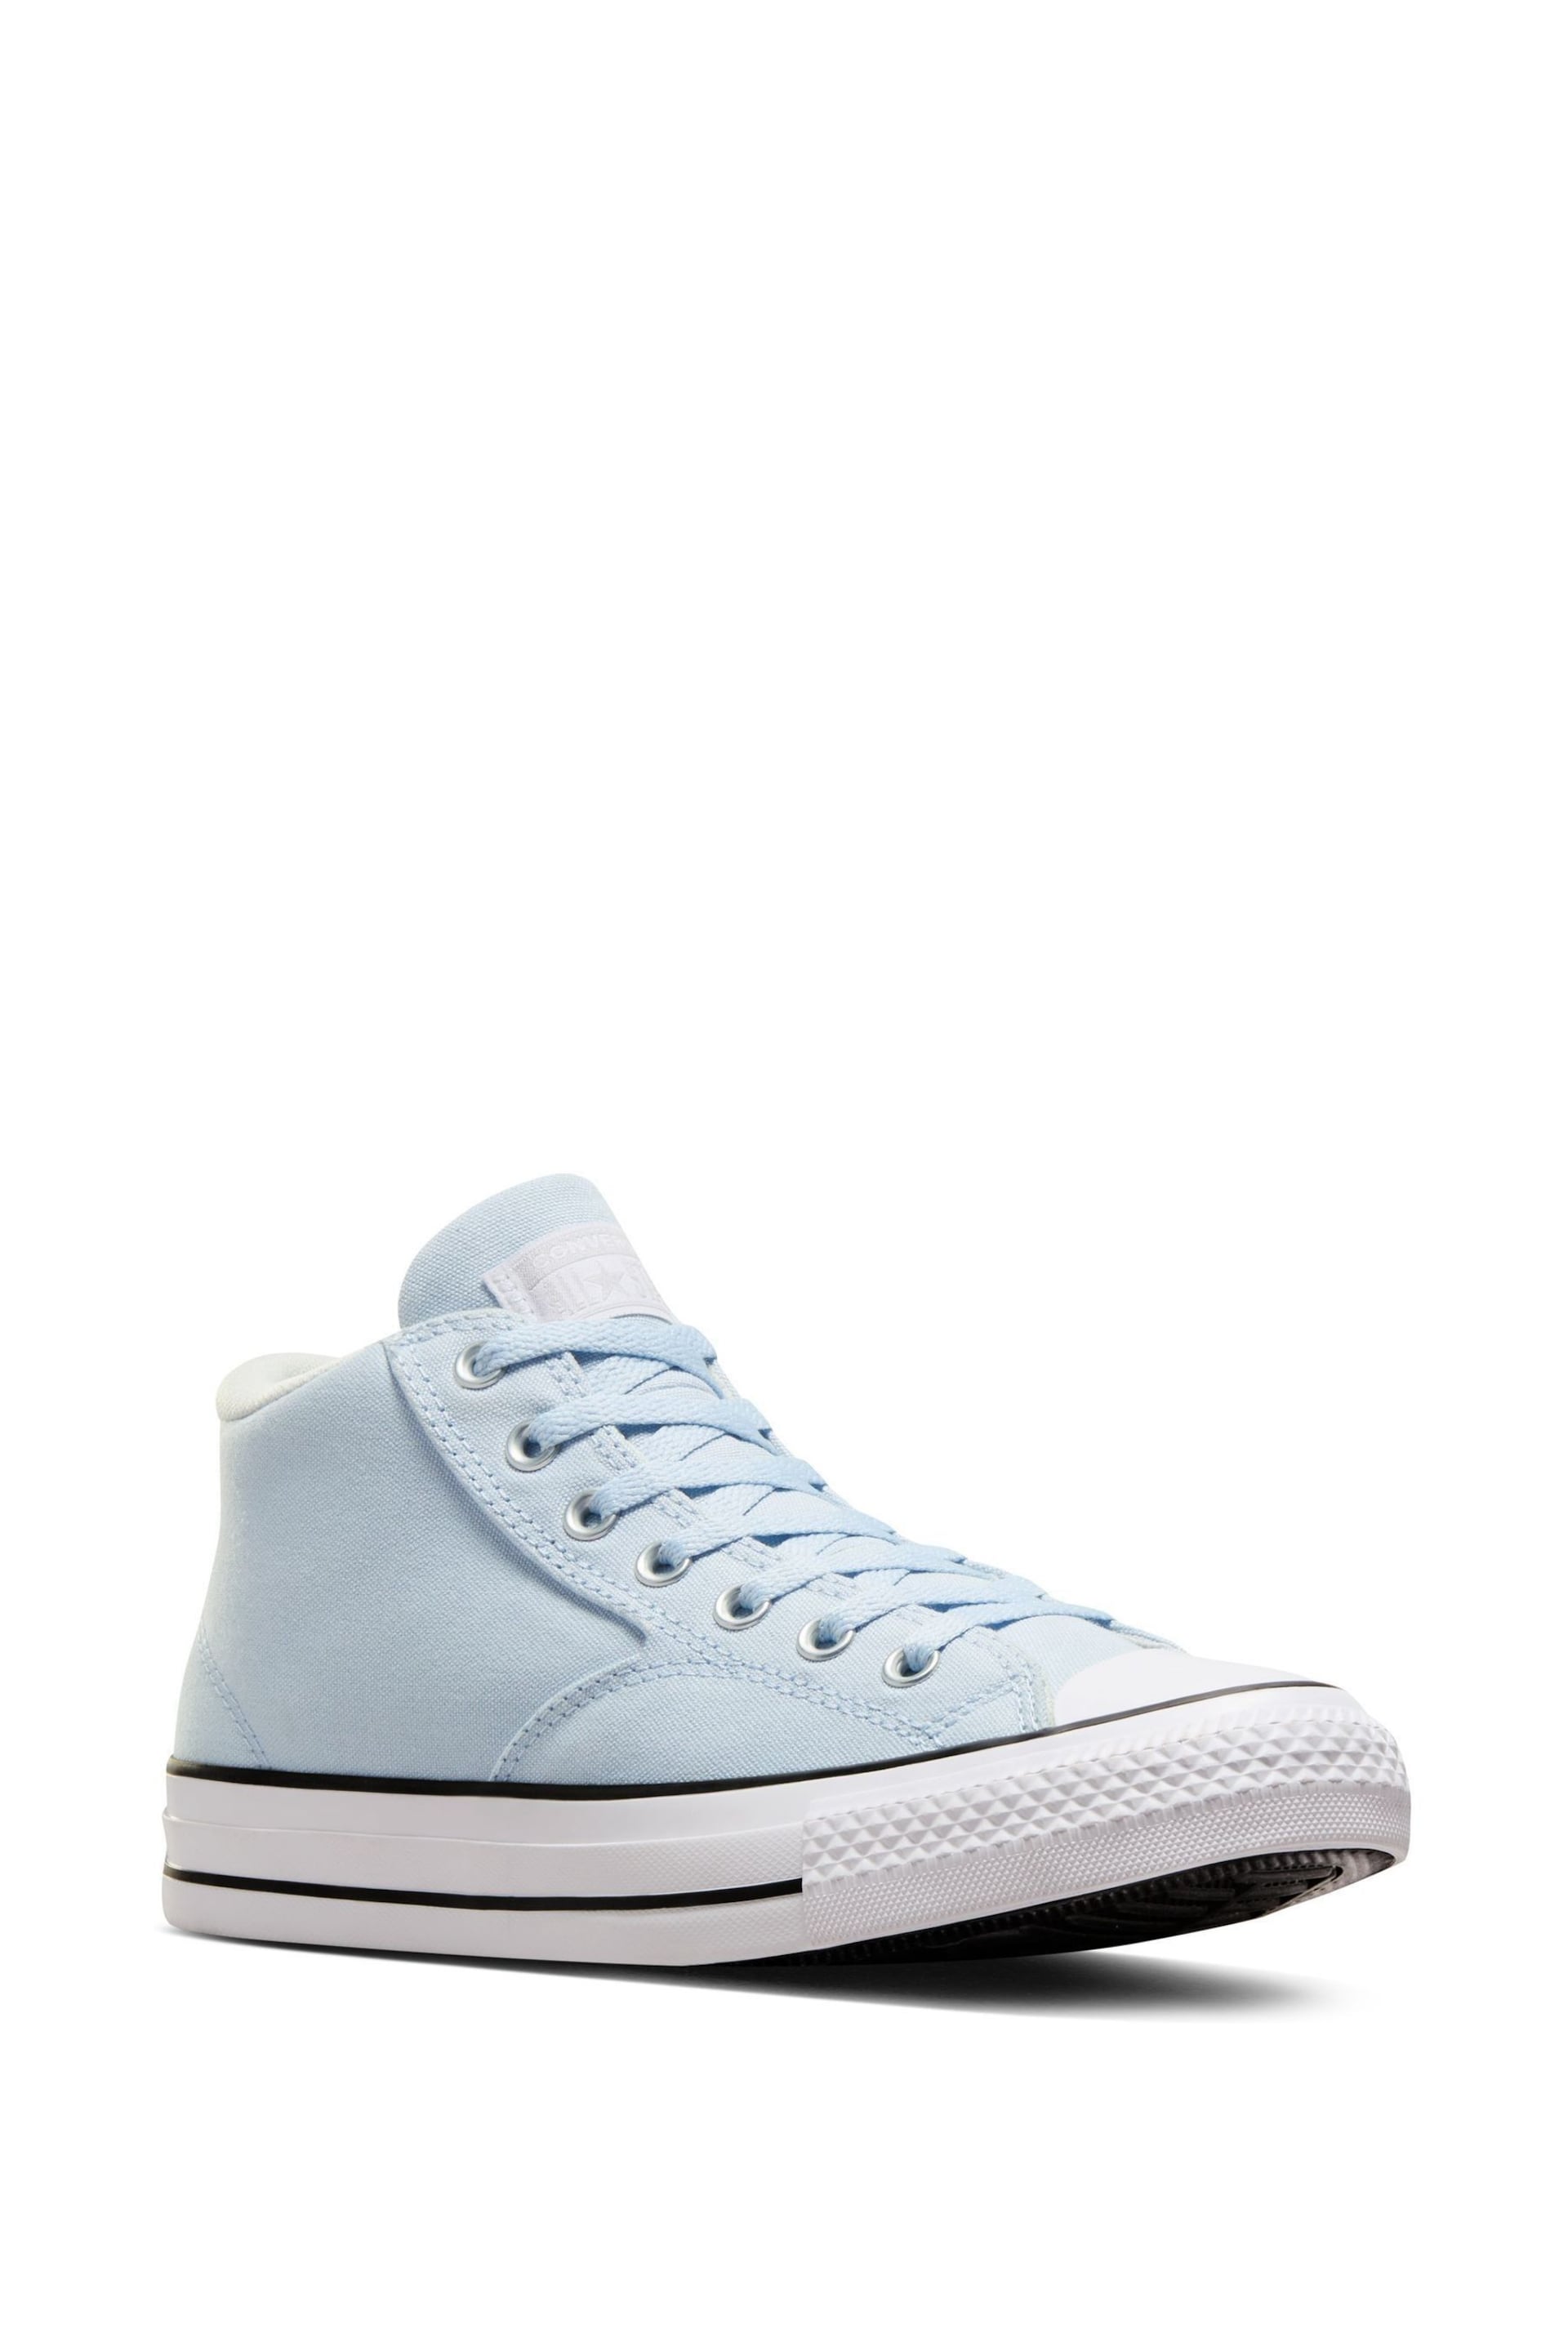 Converse Blue Chuck Taylor All Star Malden Street Trainers - Image 10 of 15